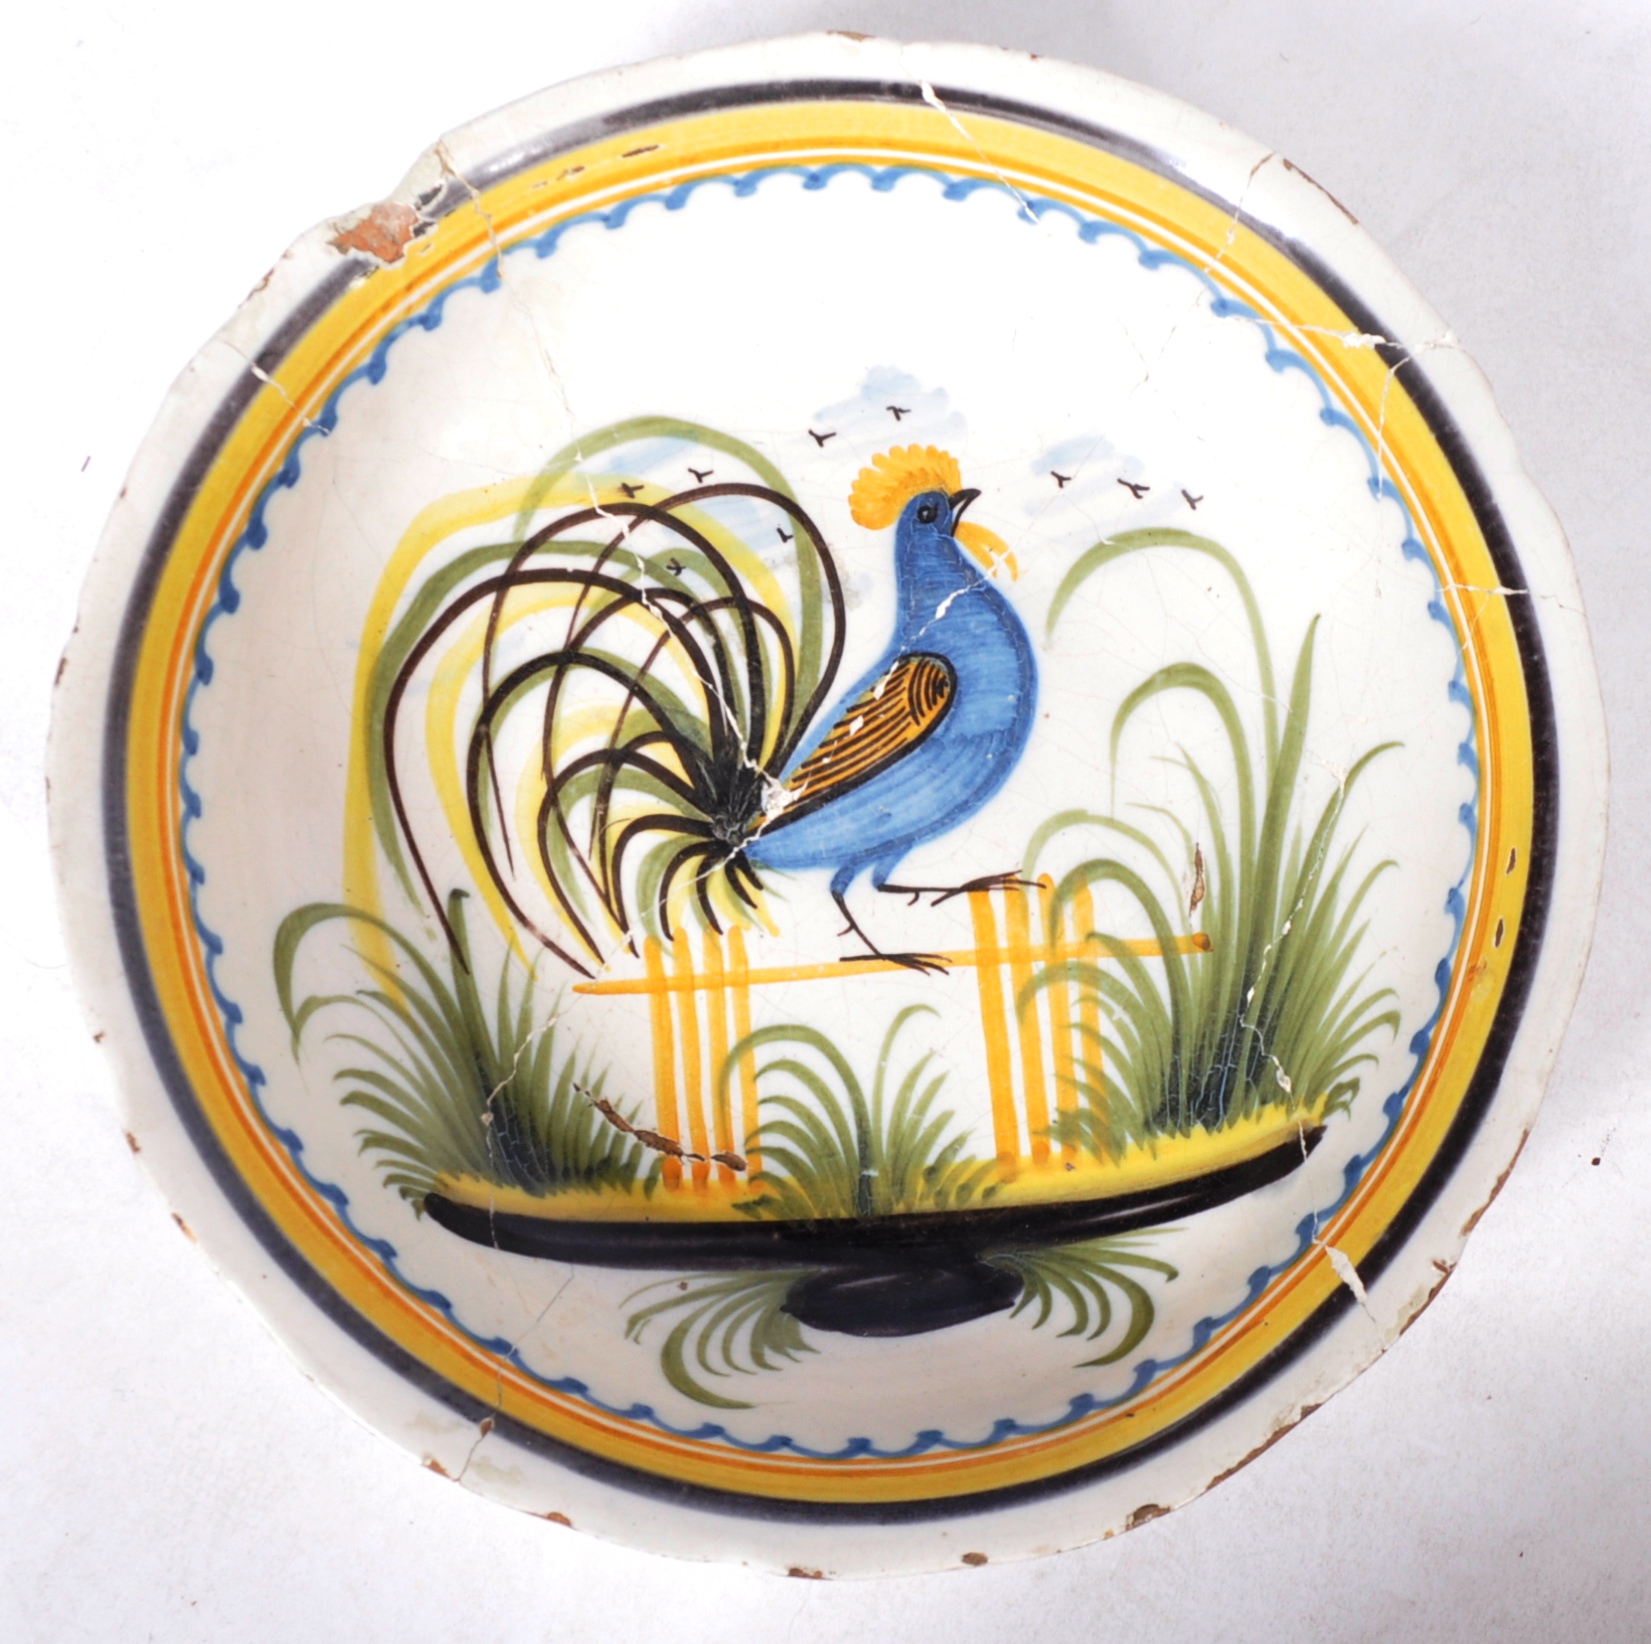 THREE 18TH / 19TH CENTURY FRENCH FAIENCE BOWLS - Image 2 of 6